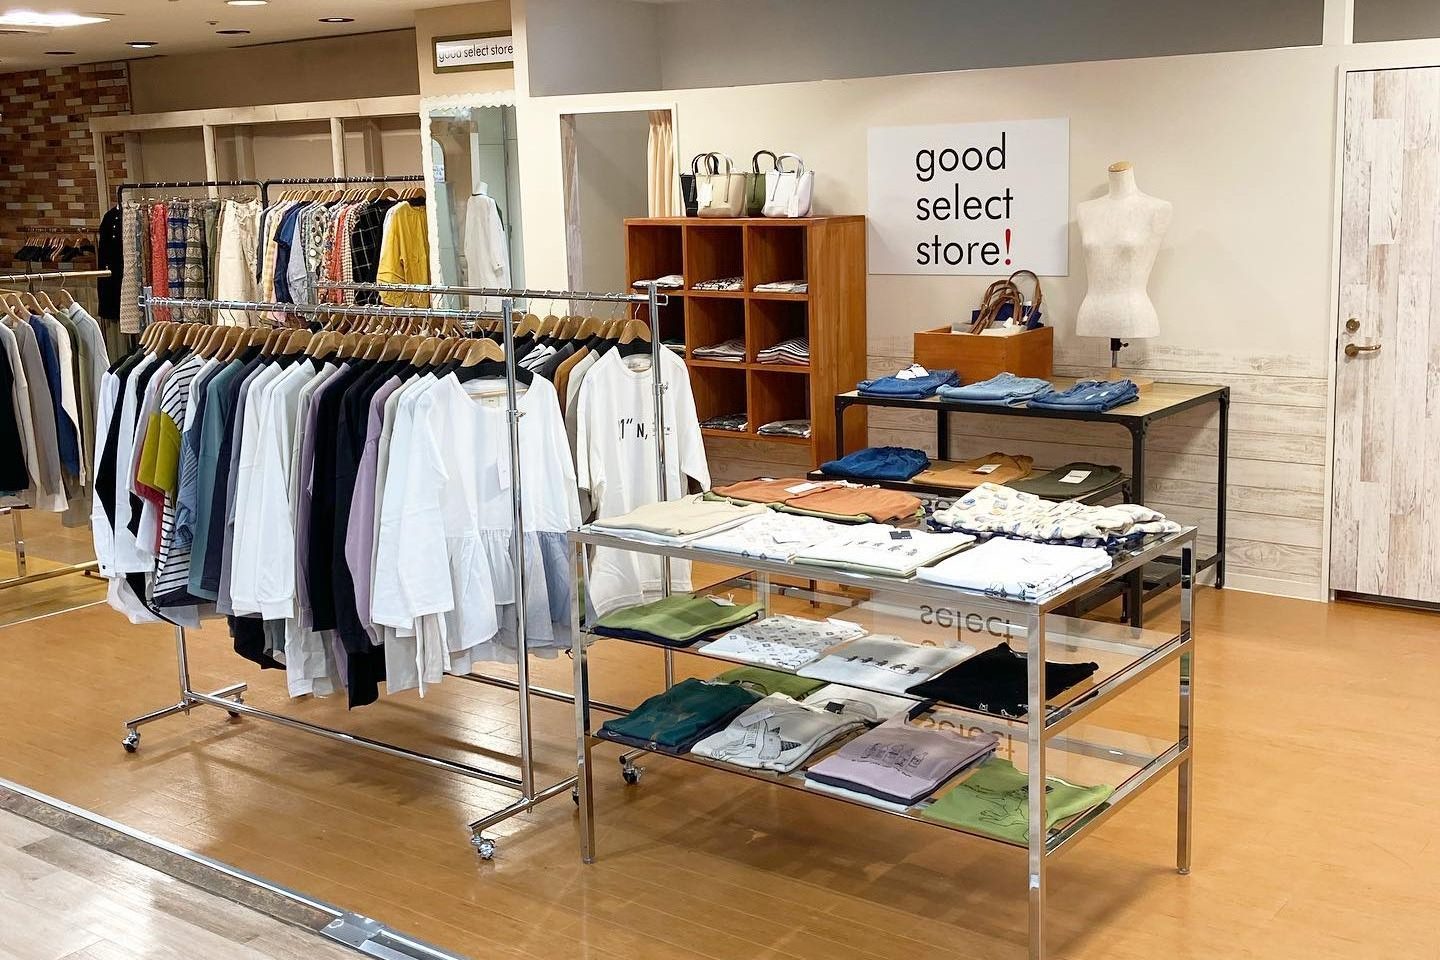 02 good select store